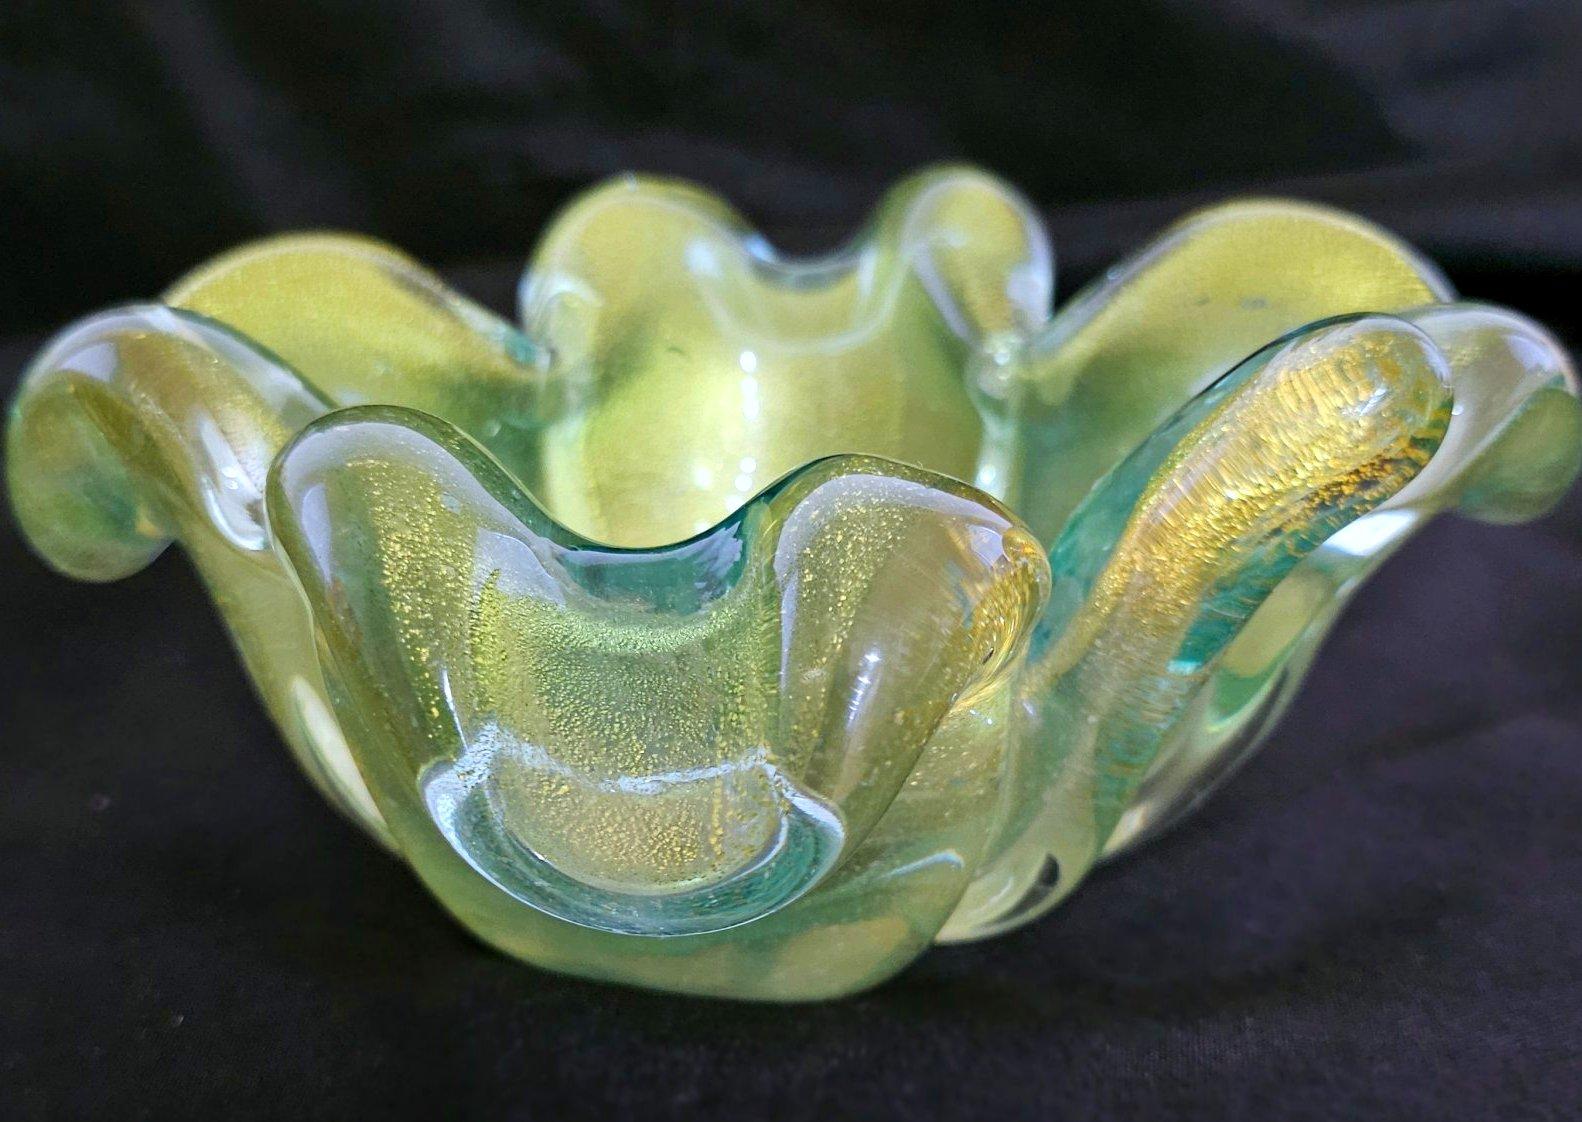 Vintage Murano Glass Bowl with Gold Polveri, Barovier & Toso (assumed) , though Seguso once made similar. 
Either way, you've just found a beautiful four leaf clover!
Very good vintage condition. No chips or cracks.
Measures about 7 x 6  x 3